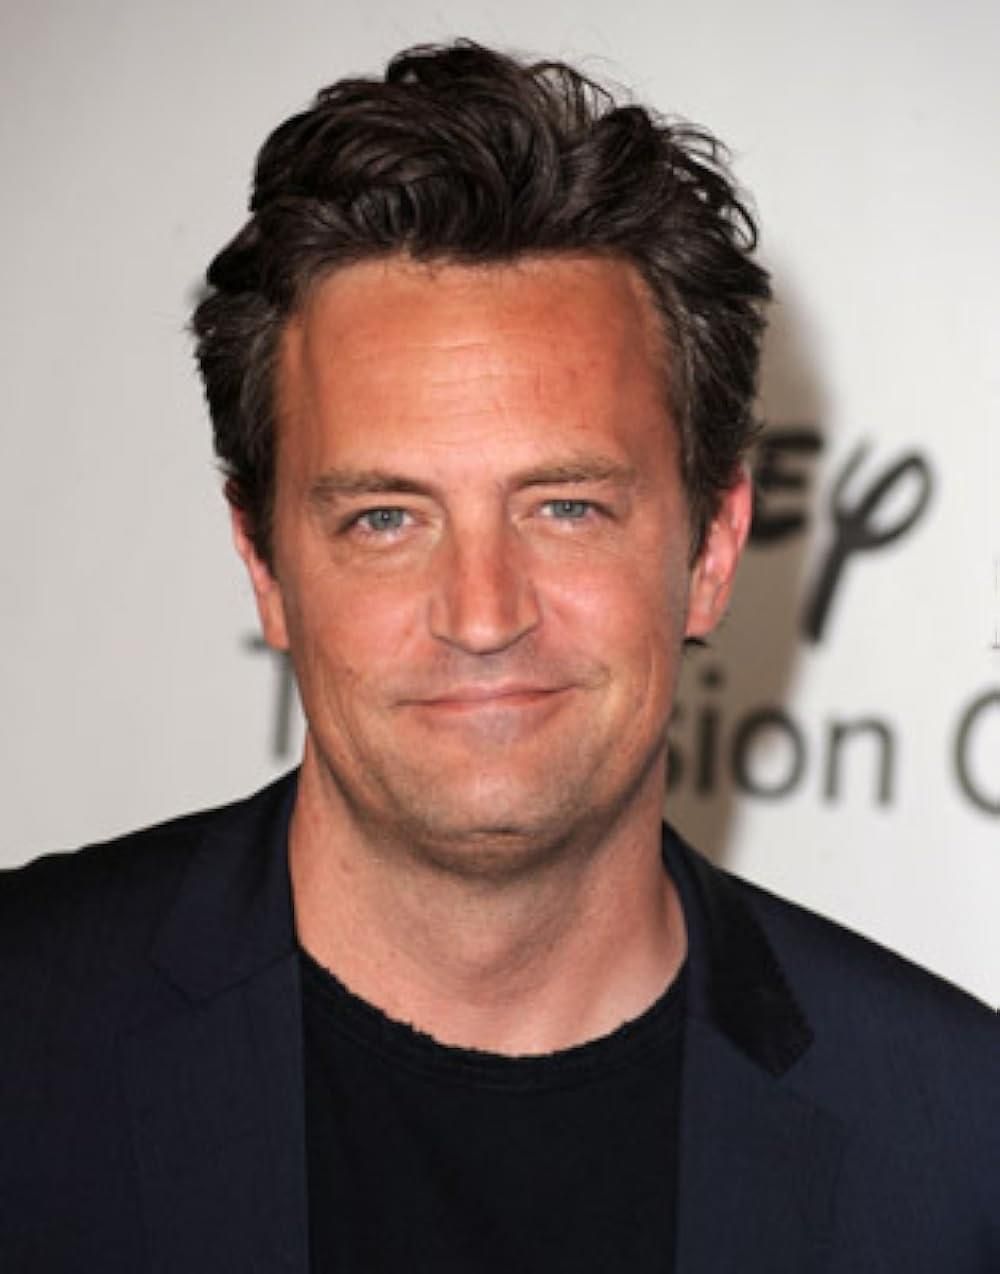 Actor Matthew Perry Dead At Age 54. He Had Predicted His Own Death